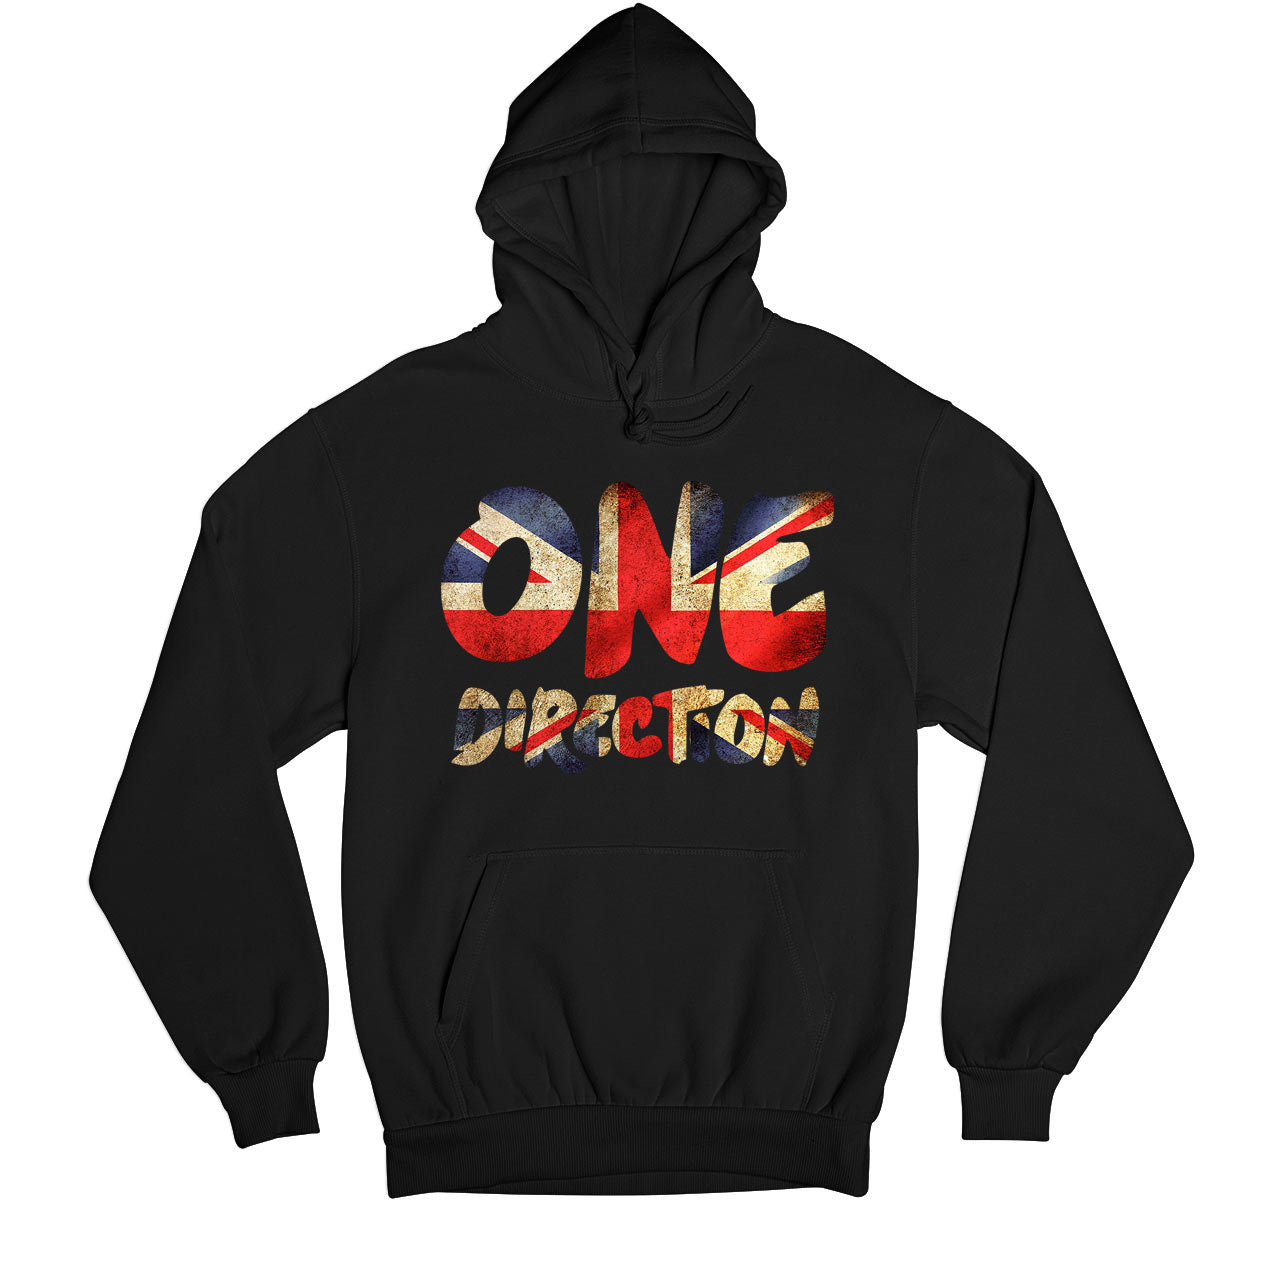 One Direction Hoodie - On Sale - XXL (Chest size 48 IN)